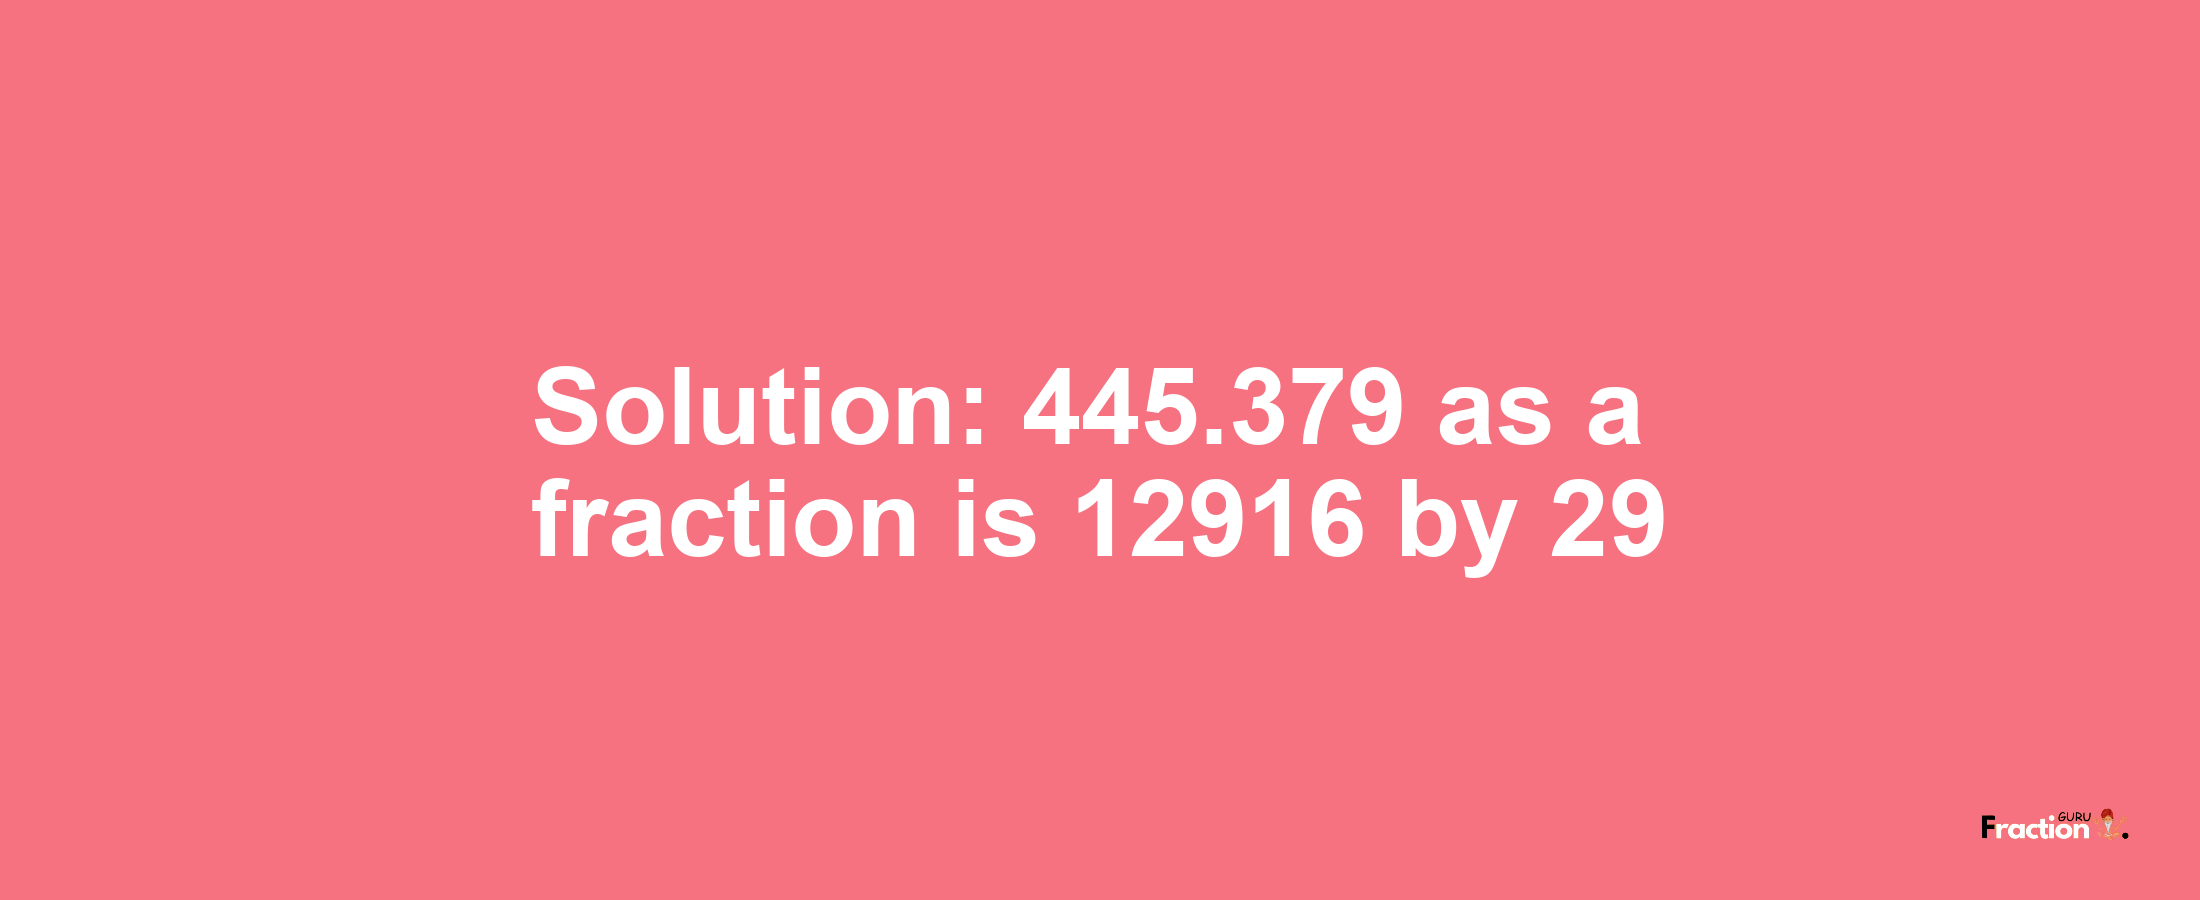 Solution:445.379 as a fraction is 12916/29